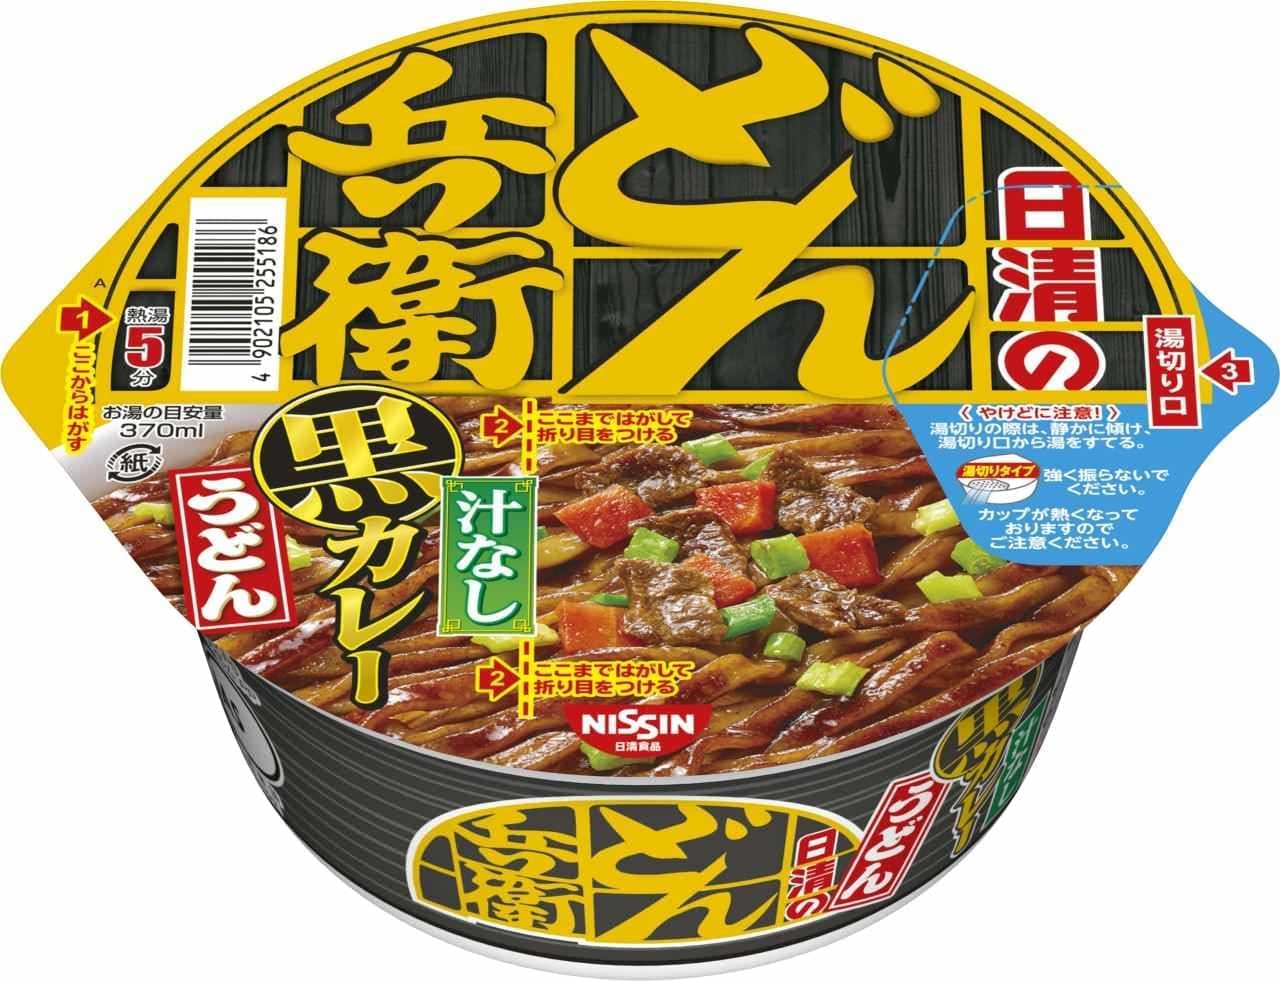 Nissin Donbei Soupless Black Curry Udon